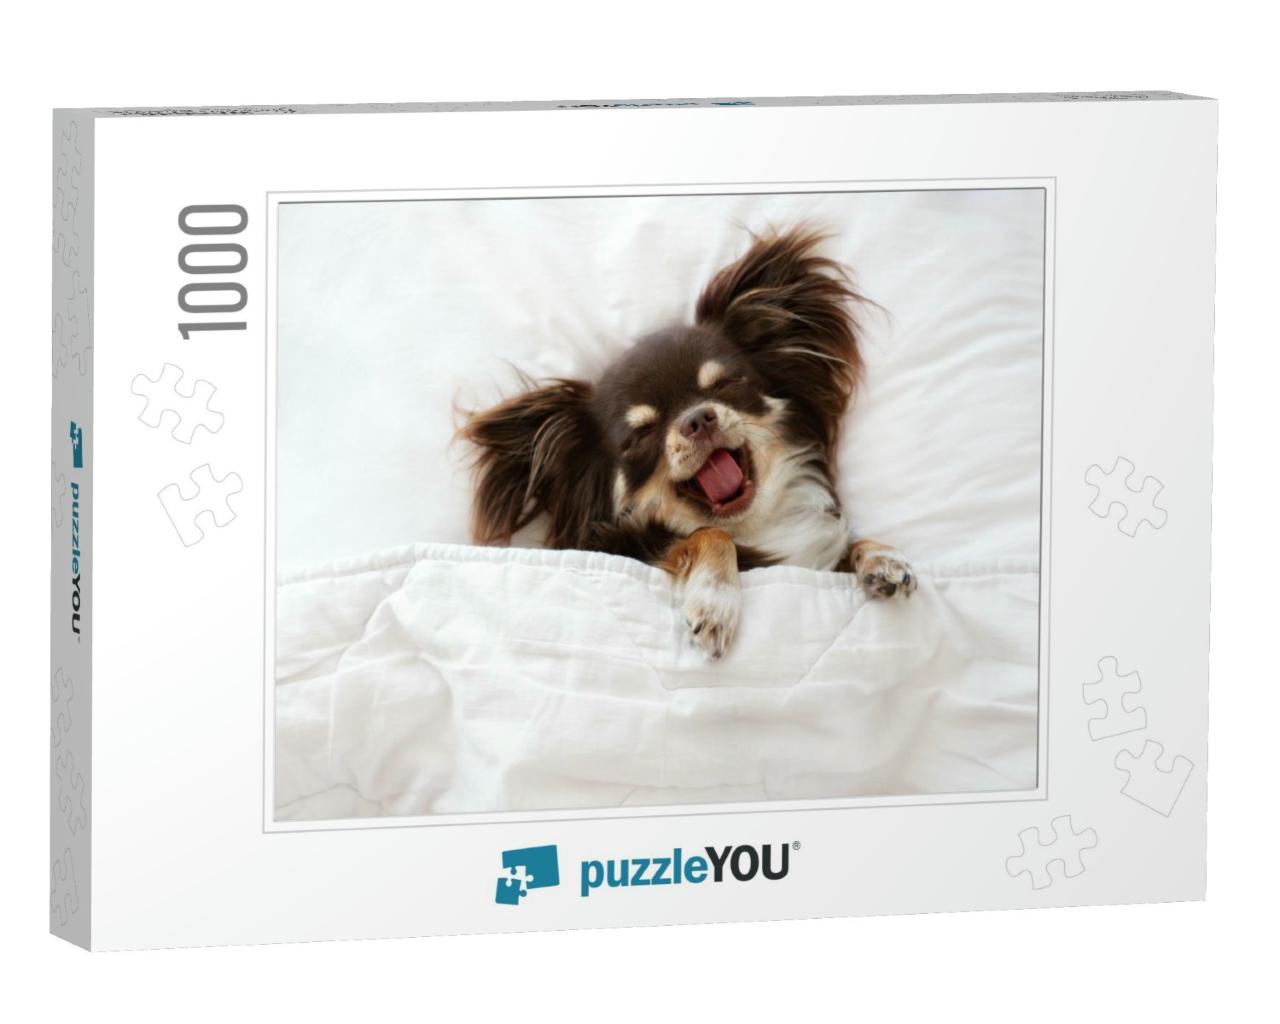 Funny Chihuahua Dog Sleeping on a Pillow in Bed... Jigsaw Puzzle with 1000 pieces